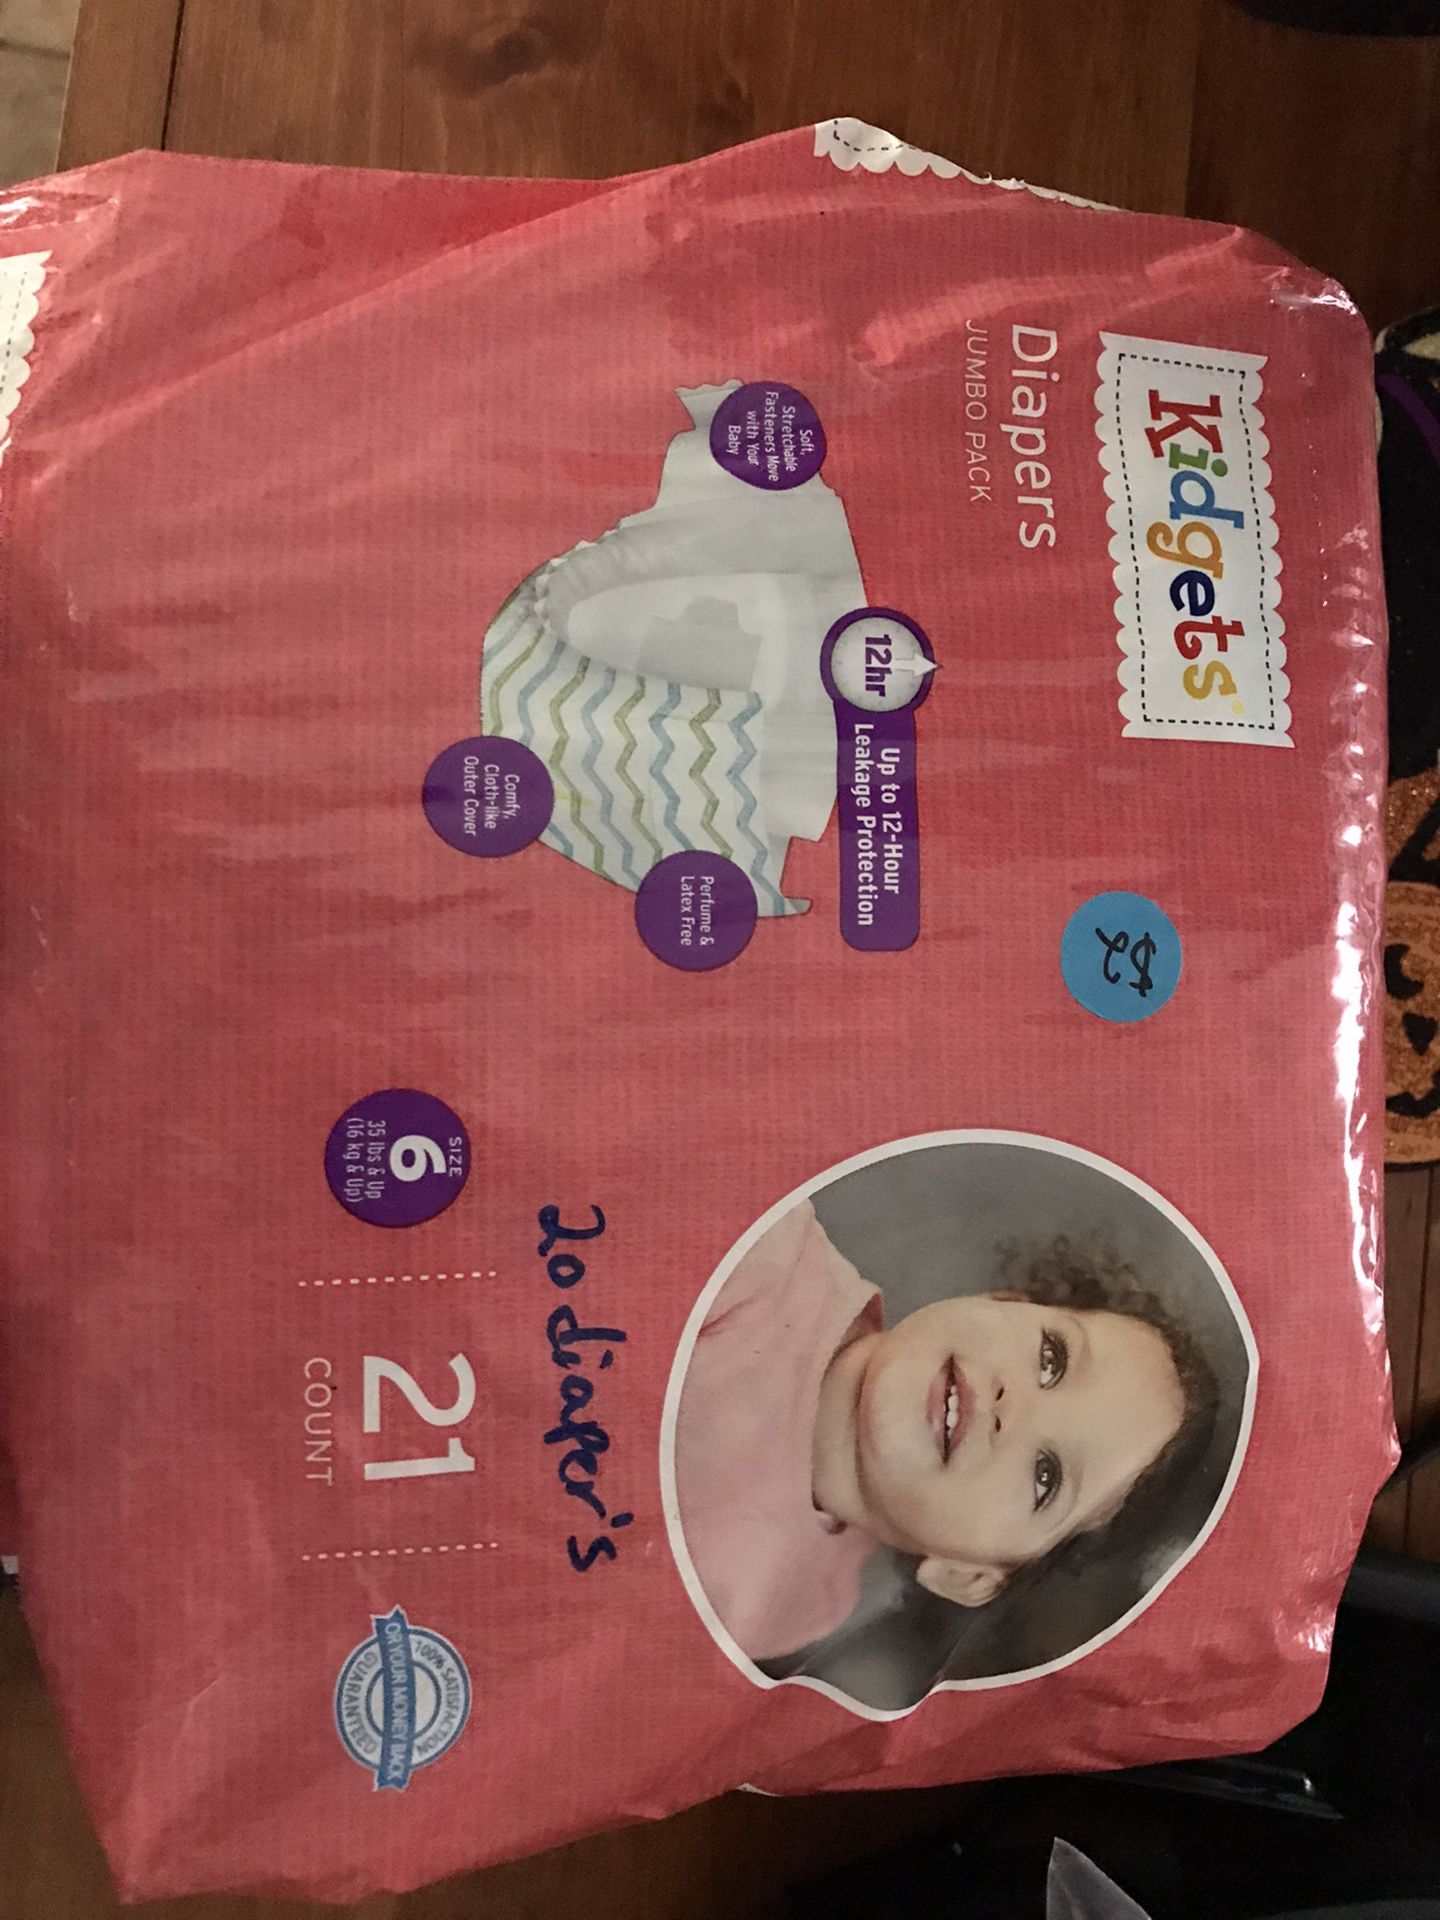 Diapers Size 6